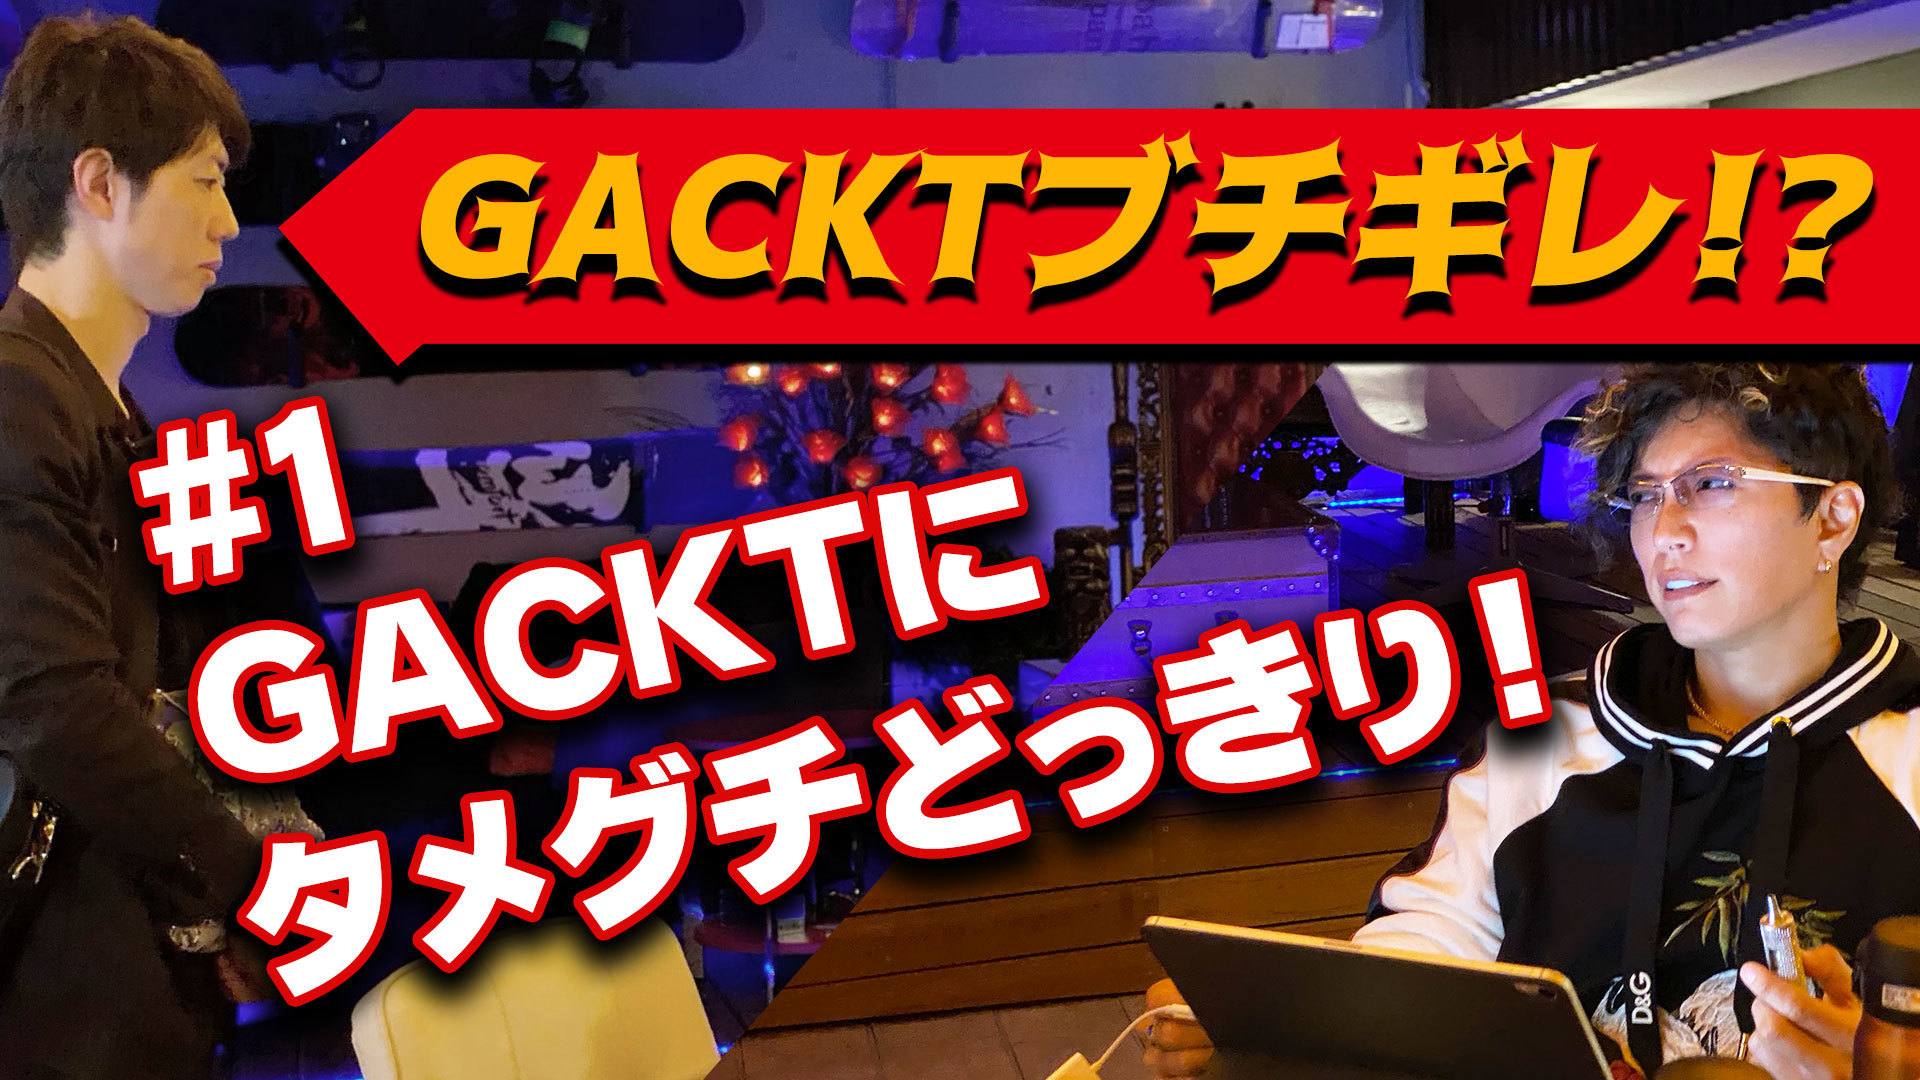 GACKT OFFICIAL YOUTUBE『がくちゃん』第１弾配信開始！ | GACKT